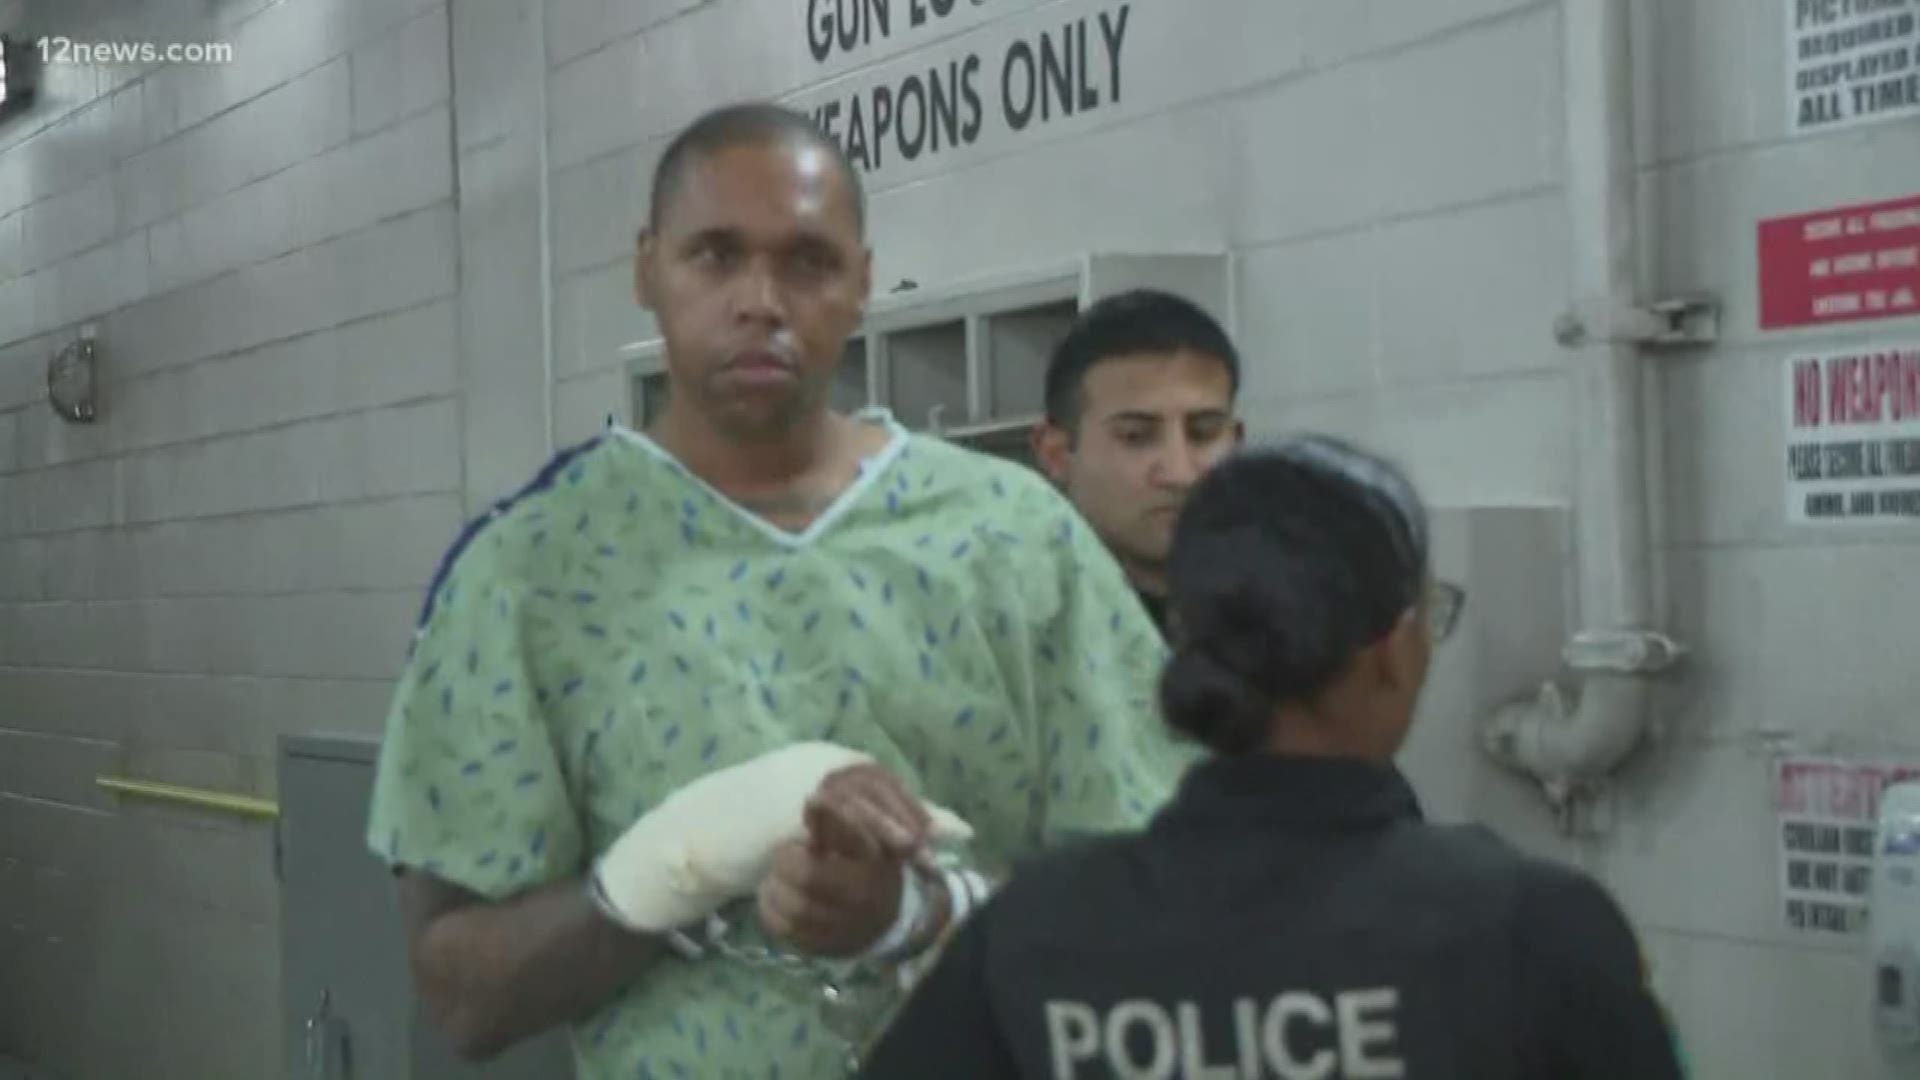 12 News cameras caught Julius Grant, accused of murdering a man at a Glendale workplace, being walked into the Fourth Avenue Jail Wednesday night.